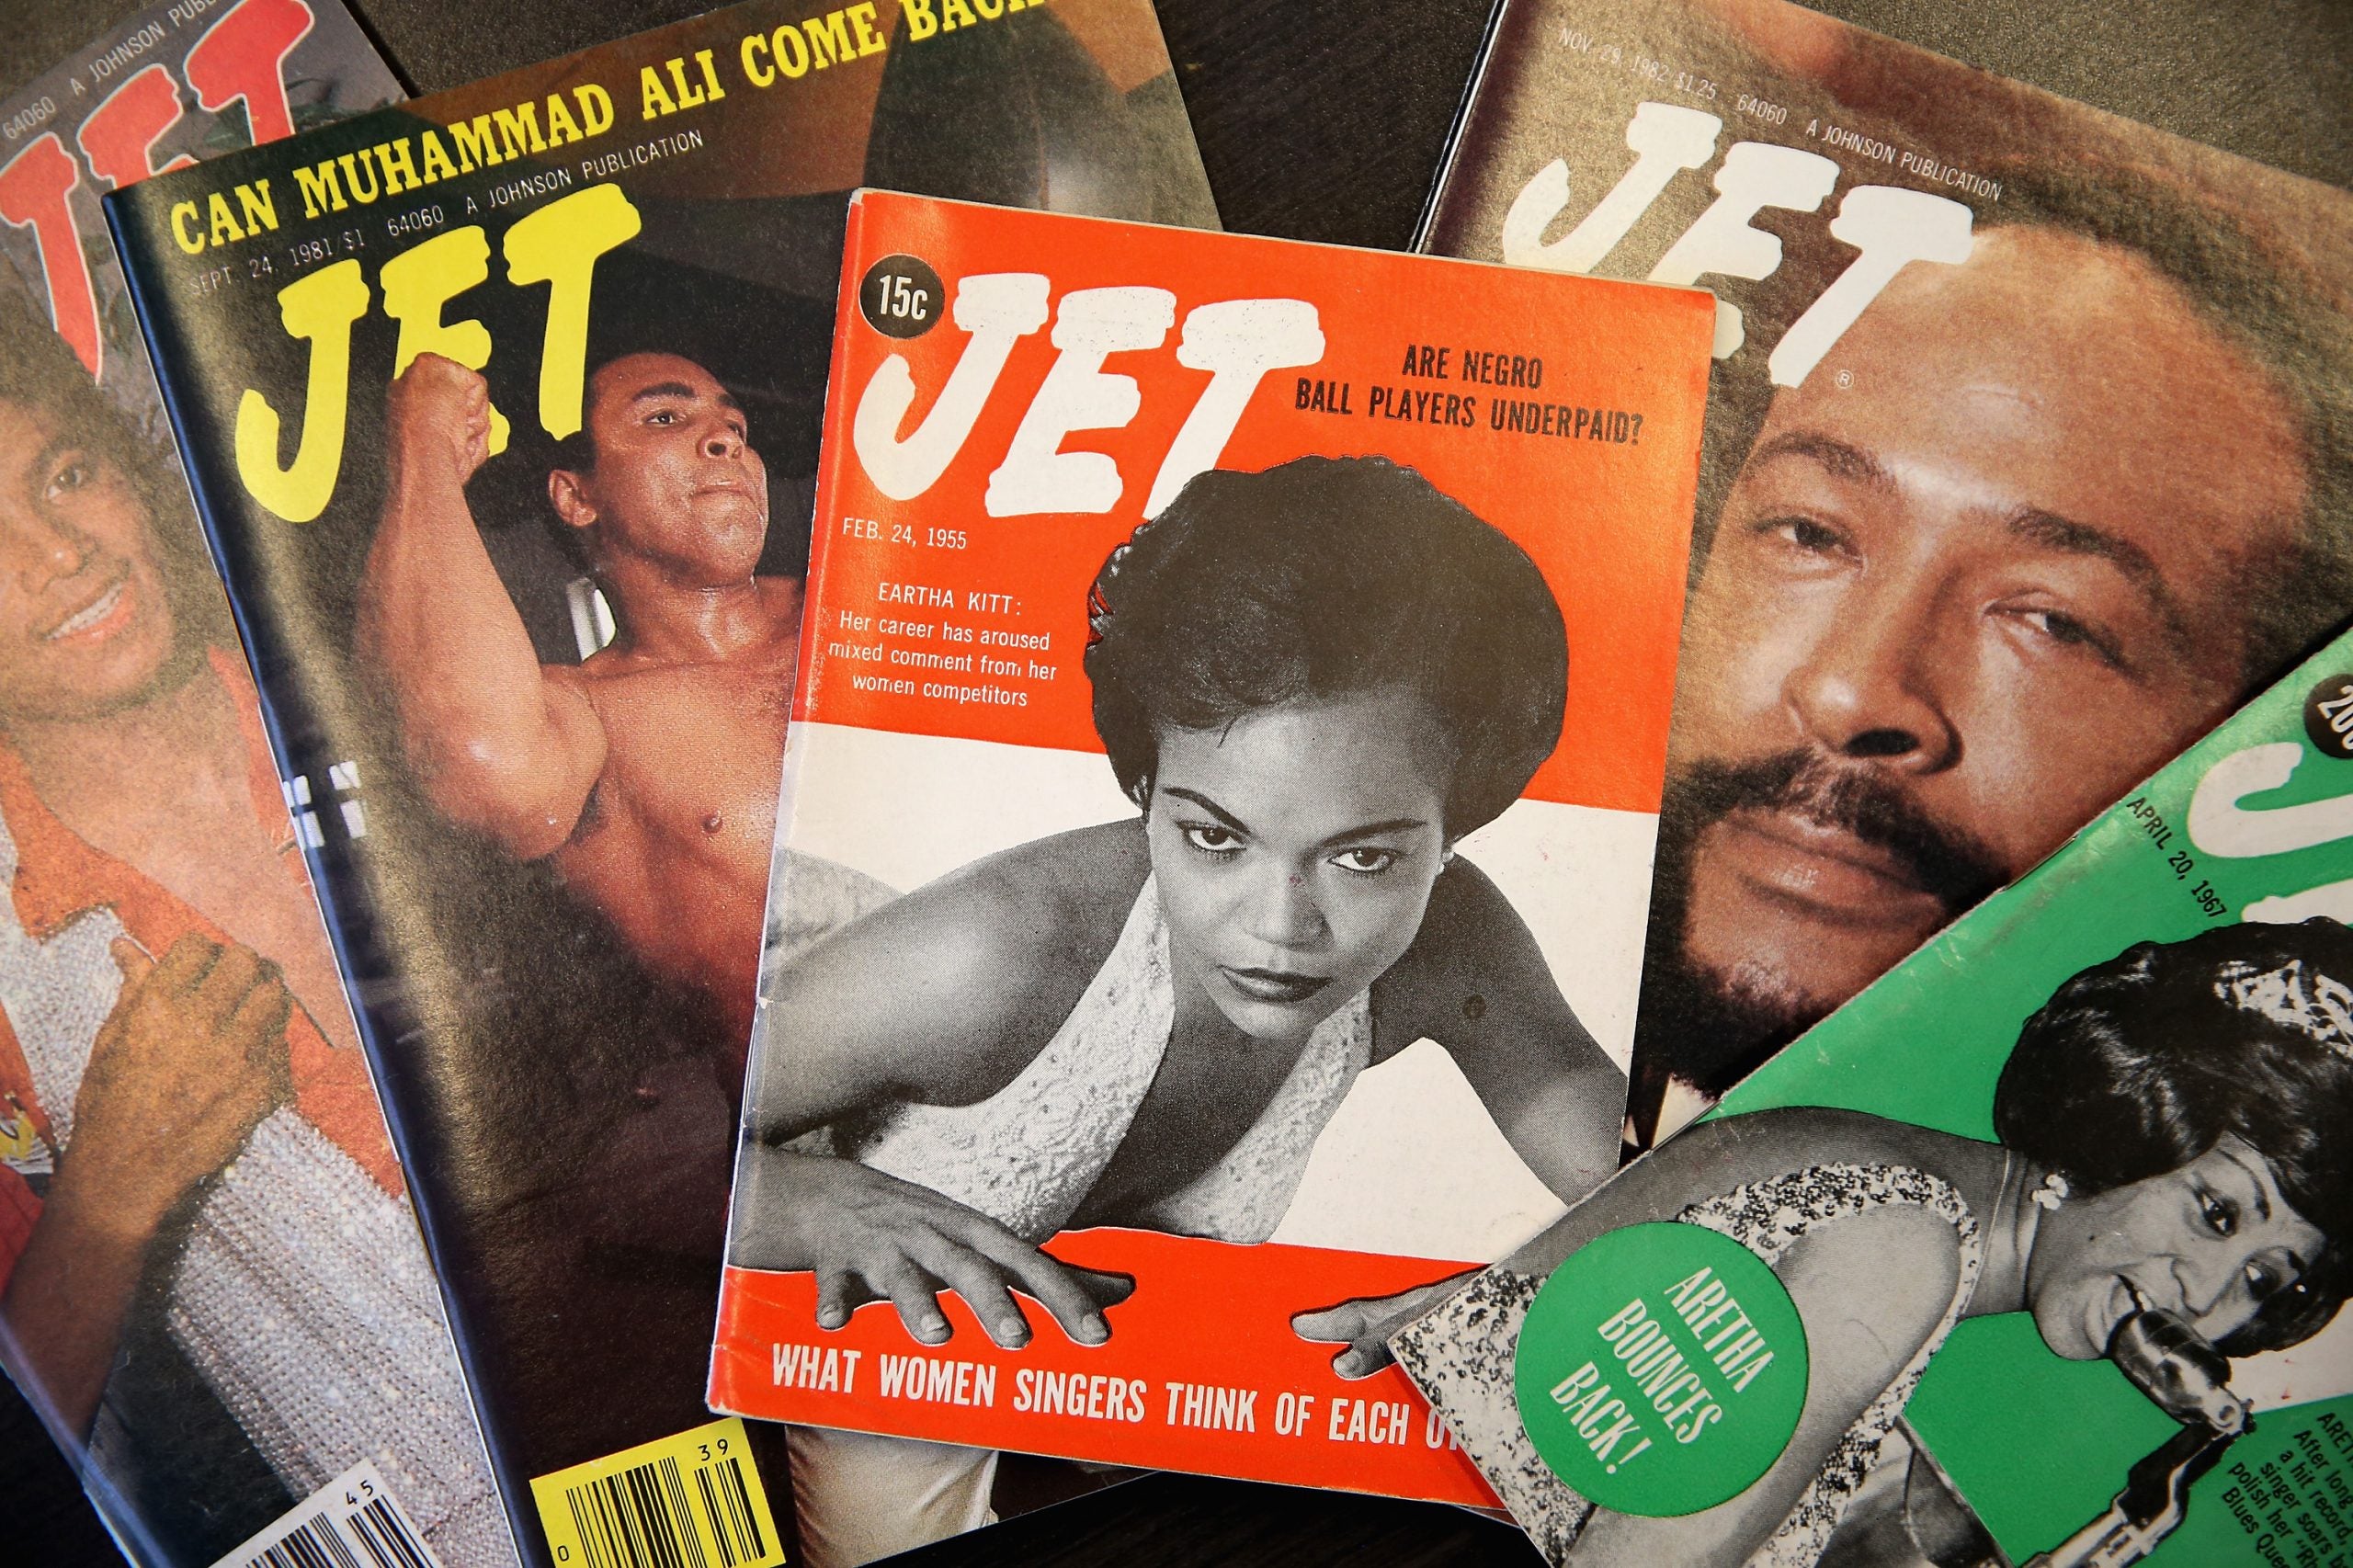 Getty And The Smithsonian Acquire Ebony And Jet Photo Archives